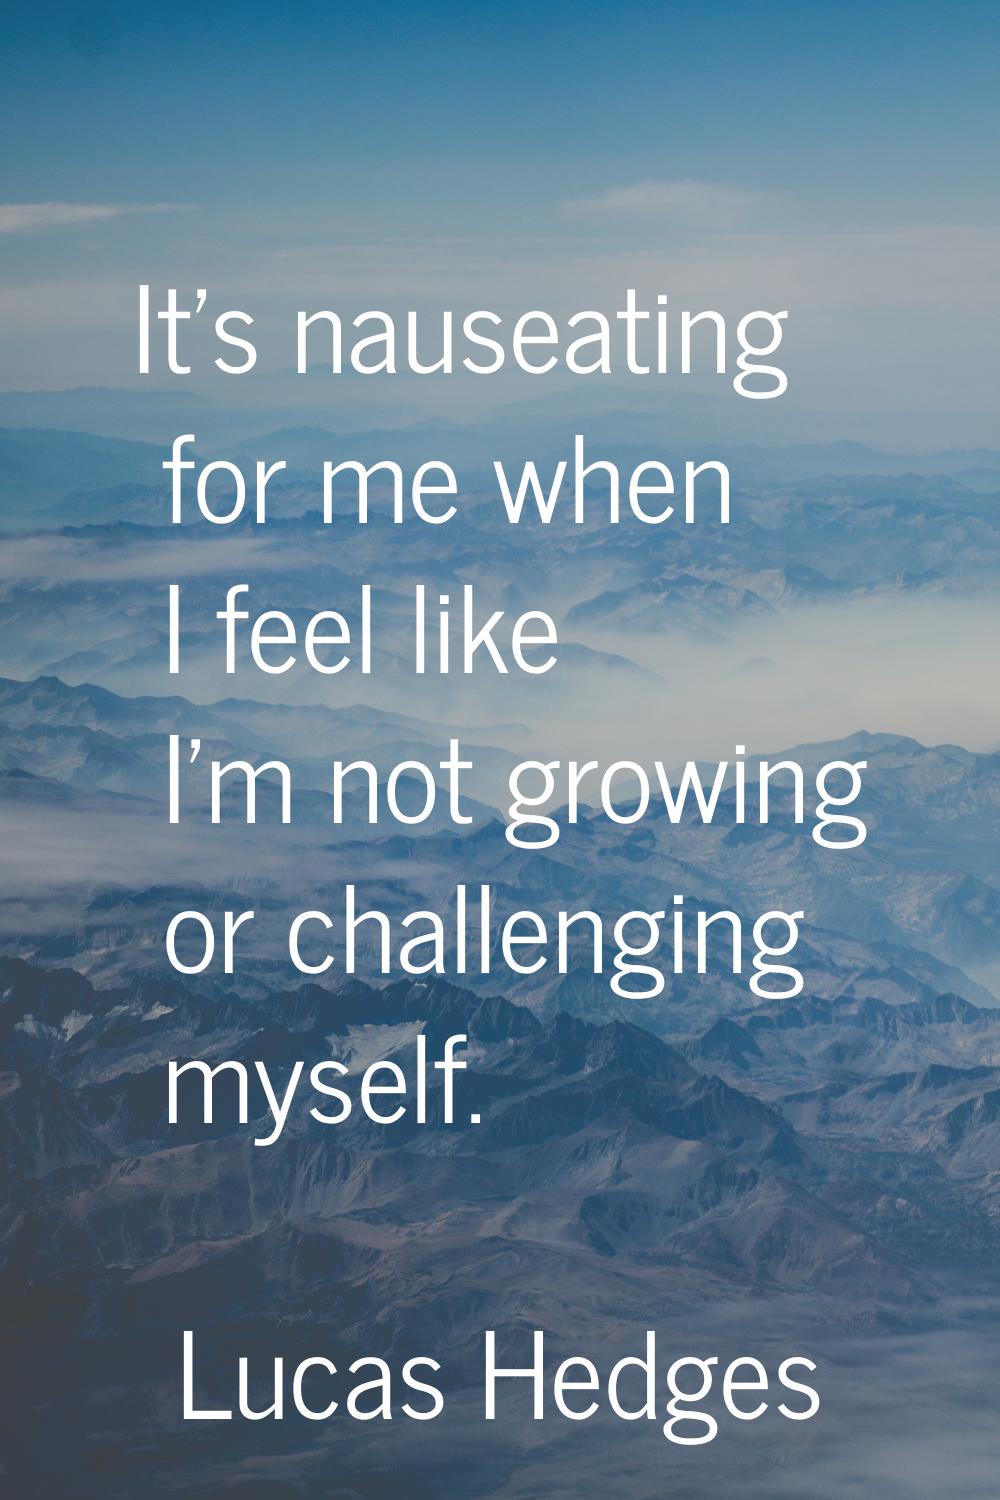 It's nauseating for me when I feel like I'm not growing or challenging myself.